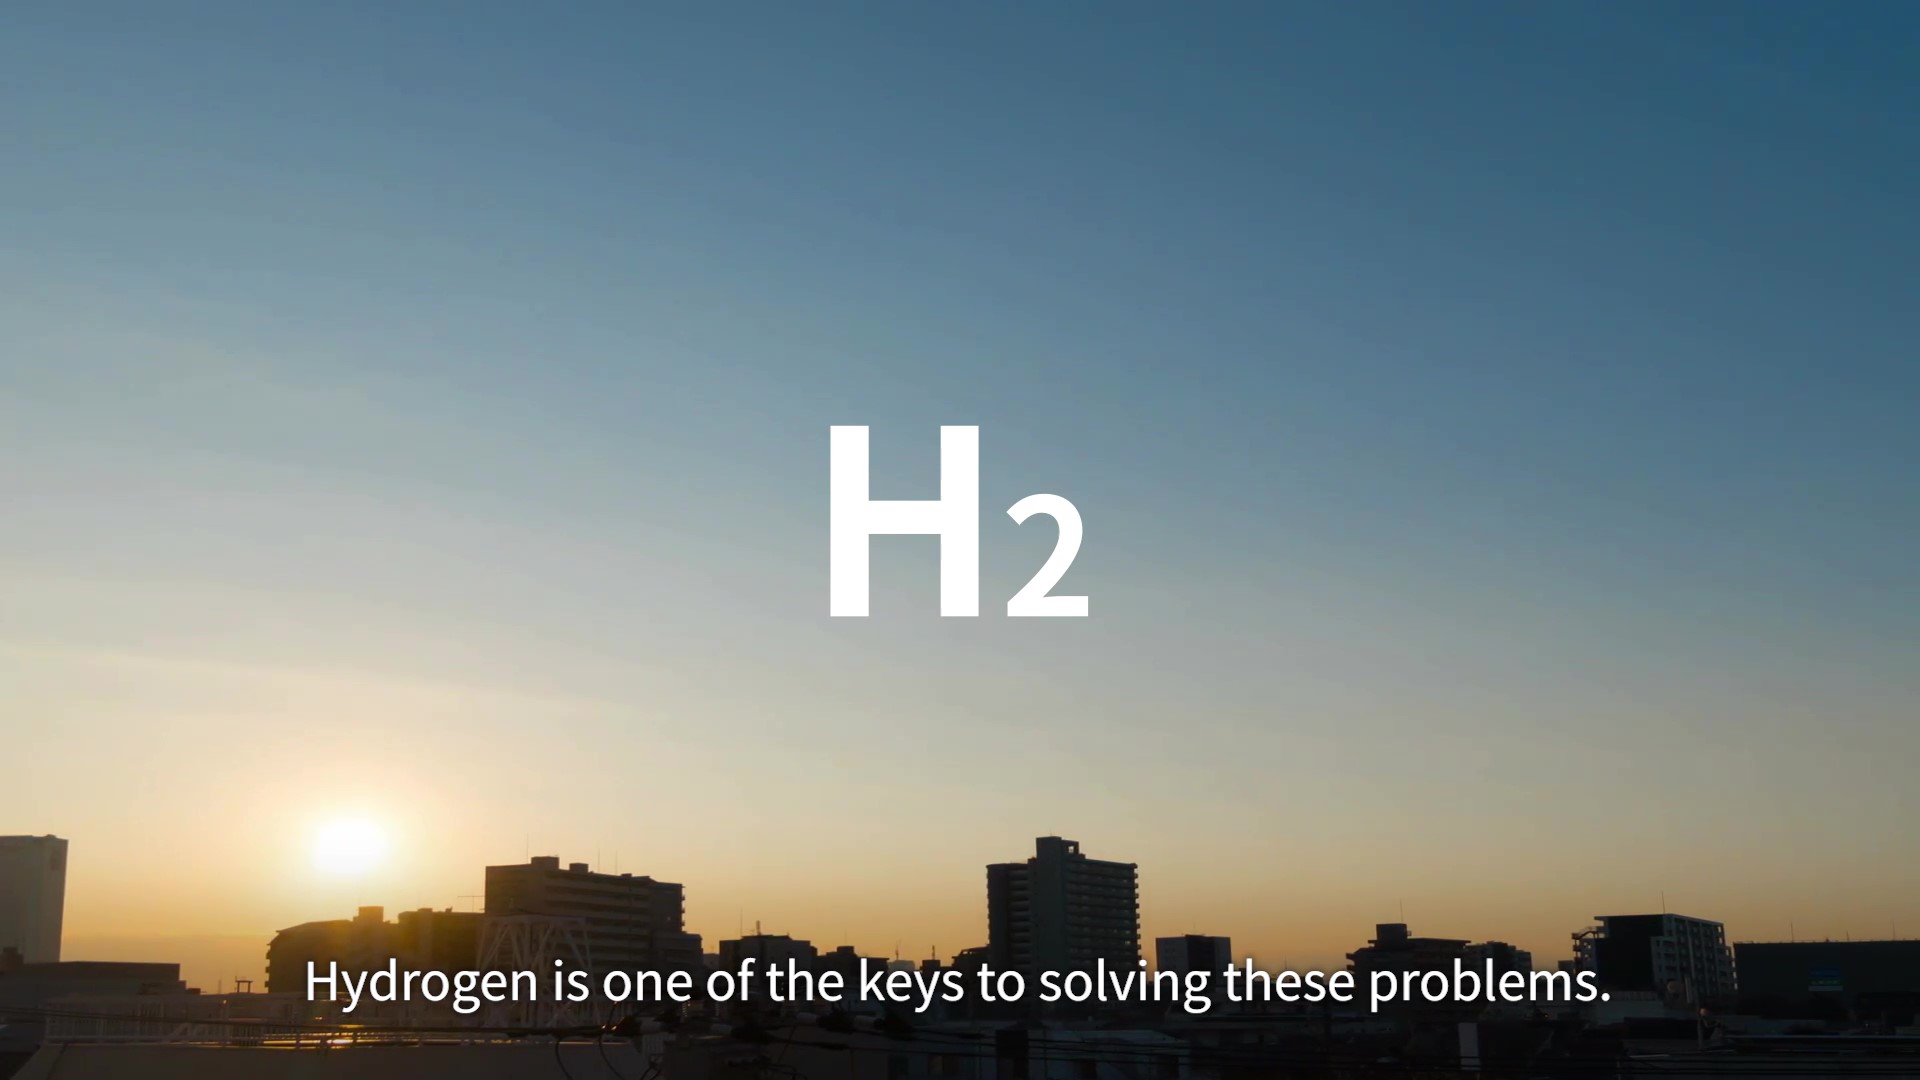 Toshiba aims to realize a hydrogen society